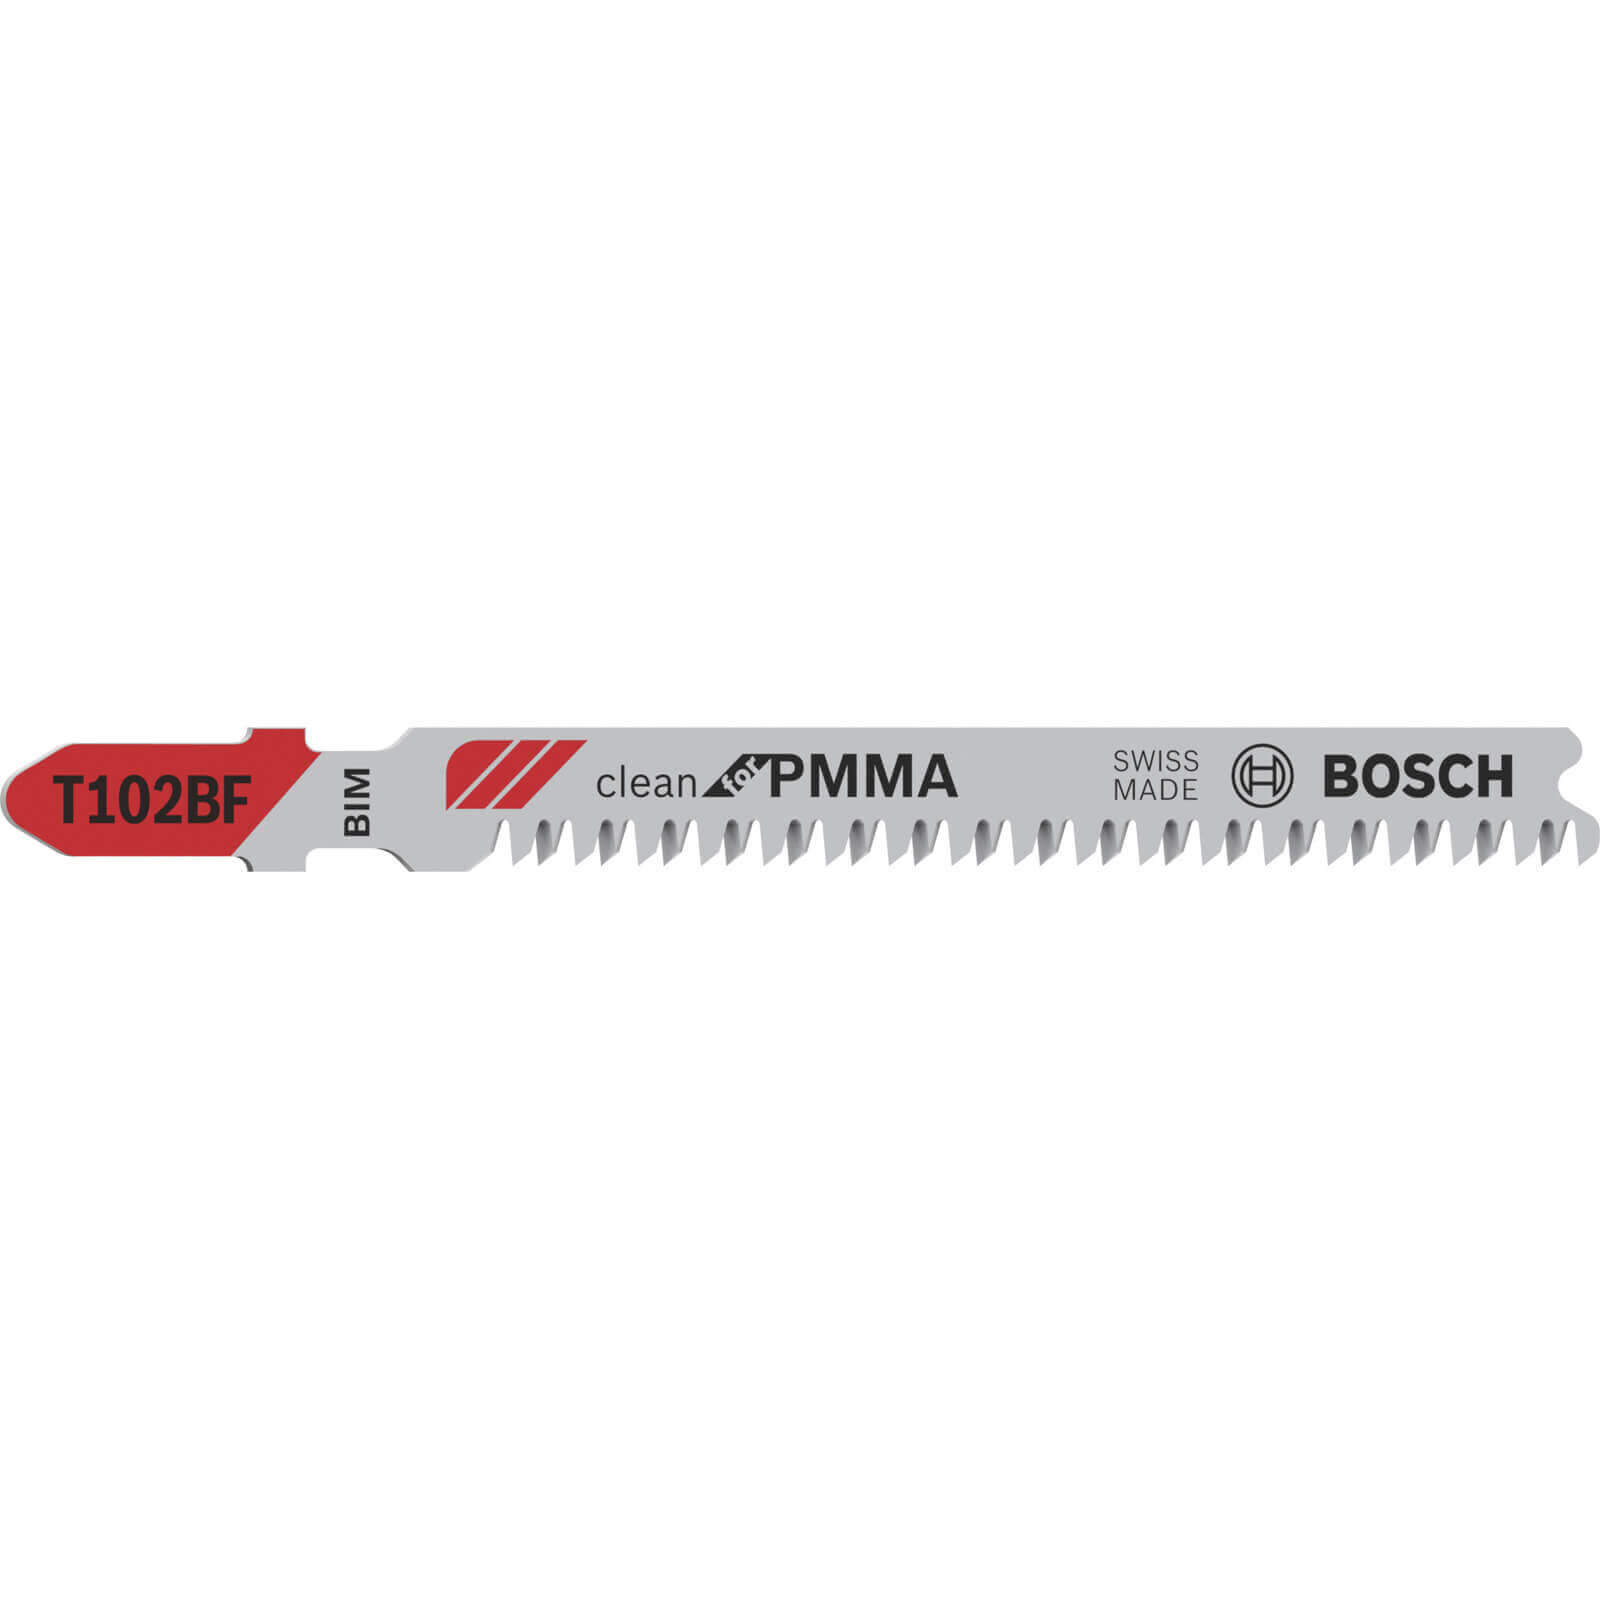 Bosch T102BF Plastic Perspex Cutting Jigsaw Blade Pack of 3